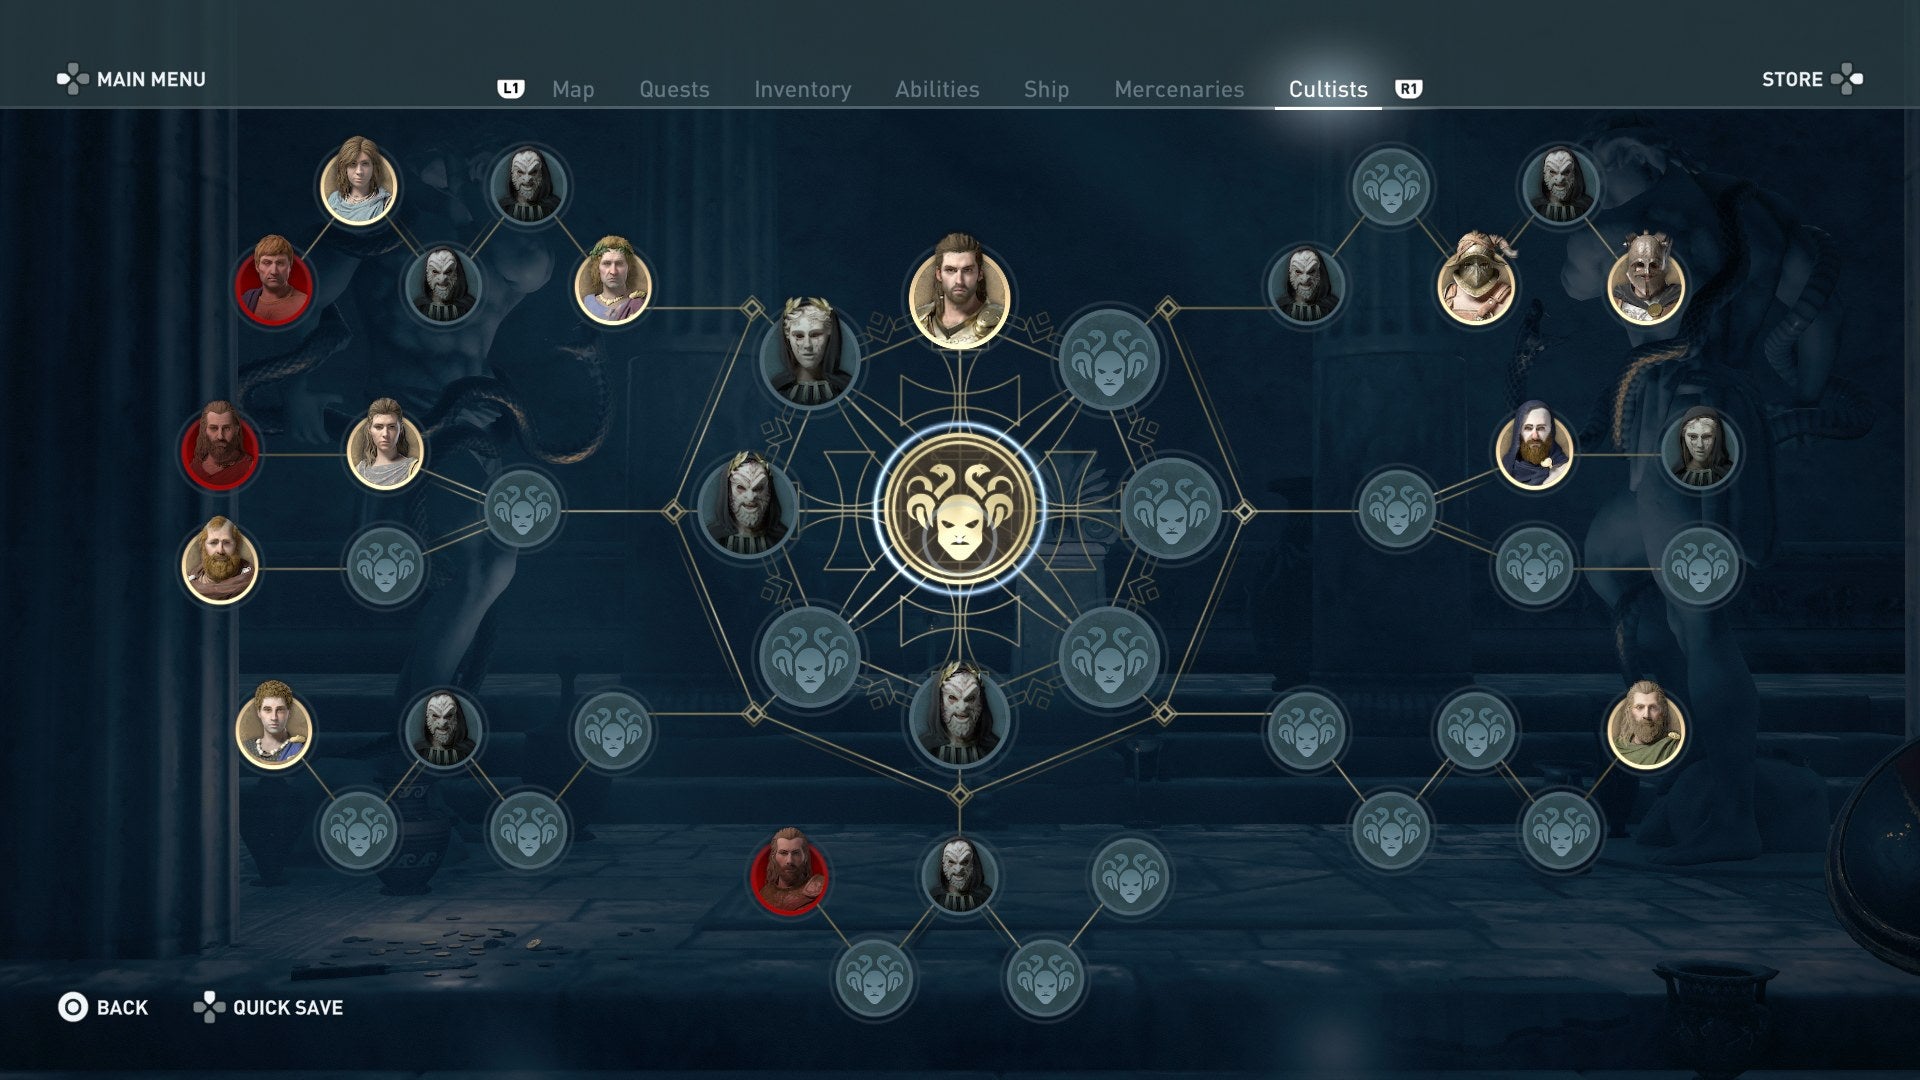 krigerisk ordlyd ecstasy Assassin's Creed Odyssey: How to Find Cultists from the Cult of Kosmos |  VG247